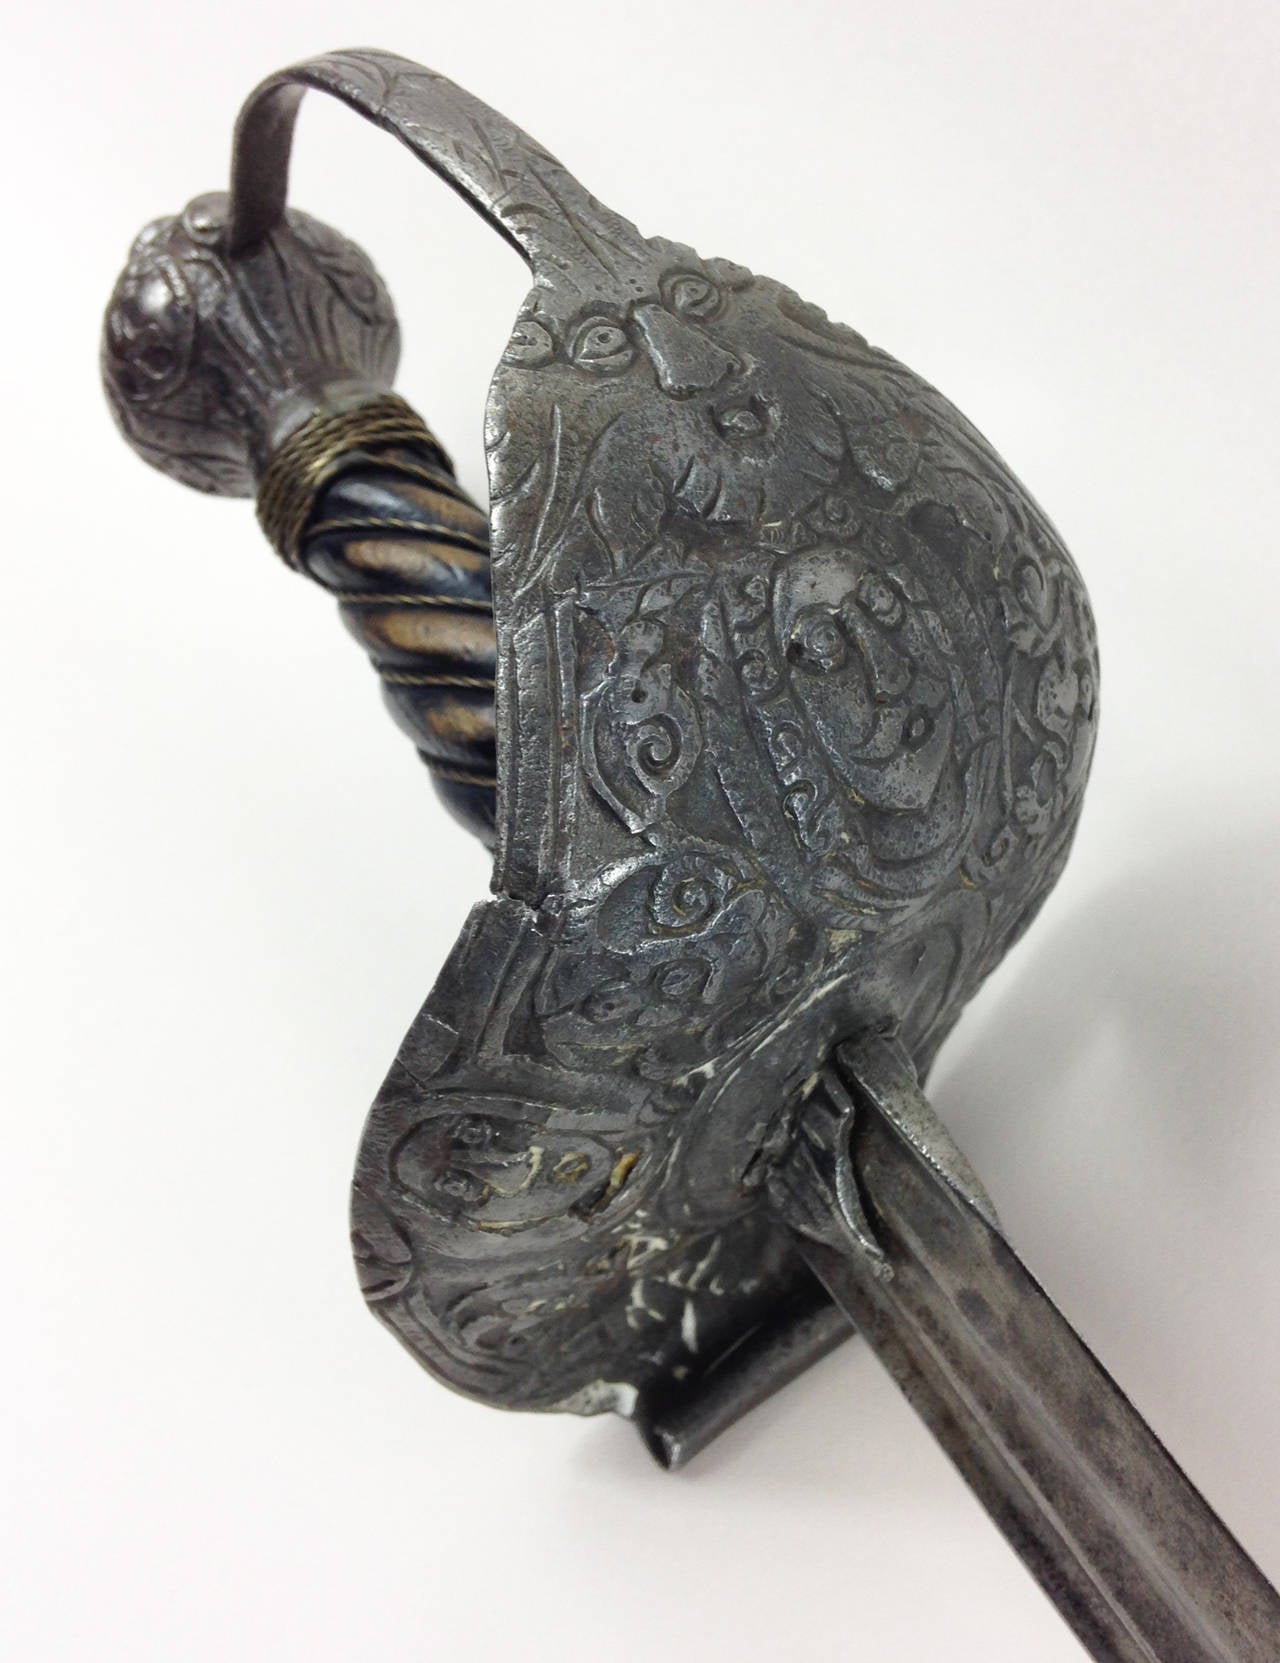 A good example of an English Civil War era 'Mortuary' hilted backsword.

An iron hilt of typical form for a sword of this pattern. Decorated with foliage and various masks, including 3 depictions of Charles I. Globular pommel and what appears to